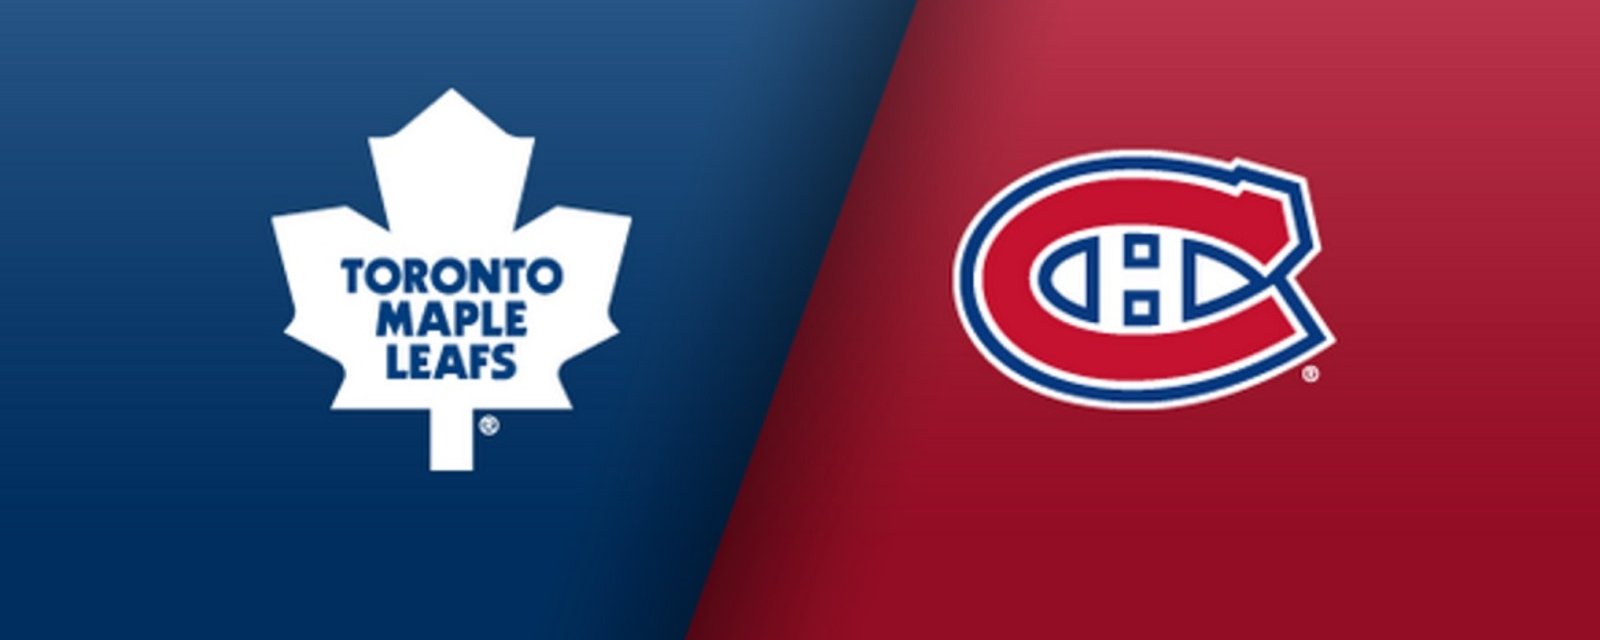 Full lineups for tonight's clash between Leafs and Habs.